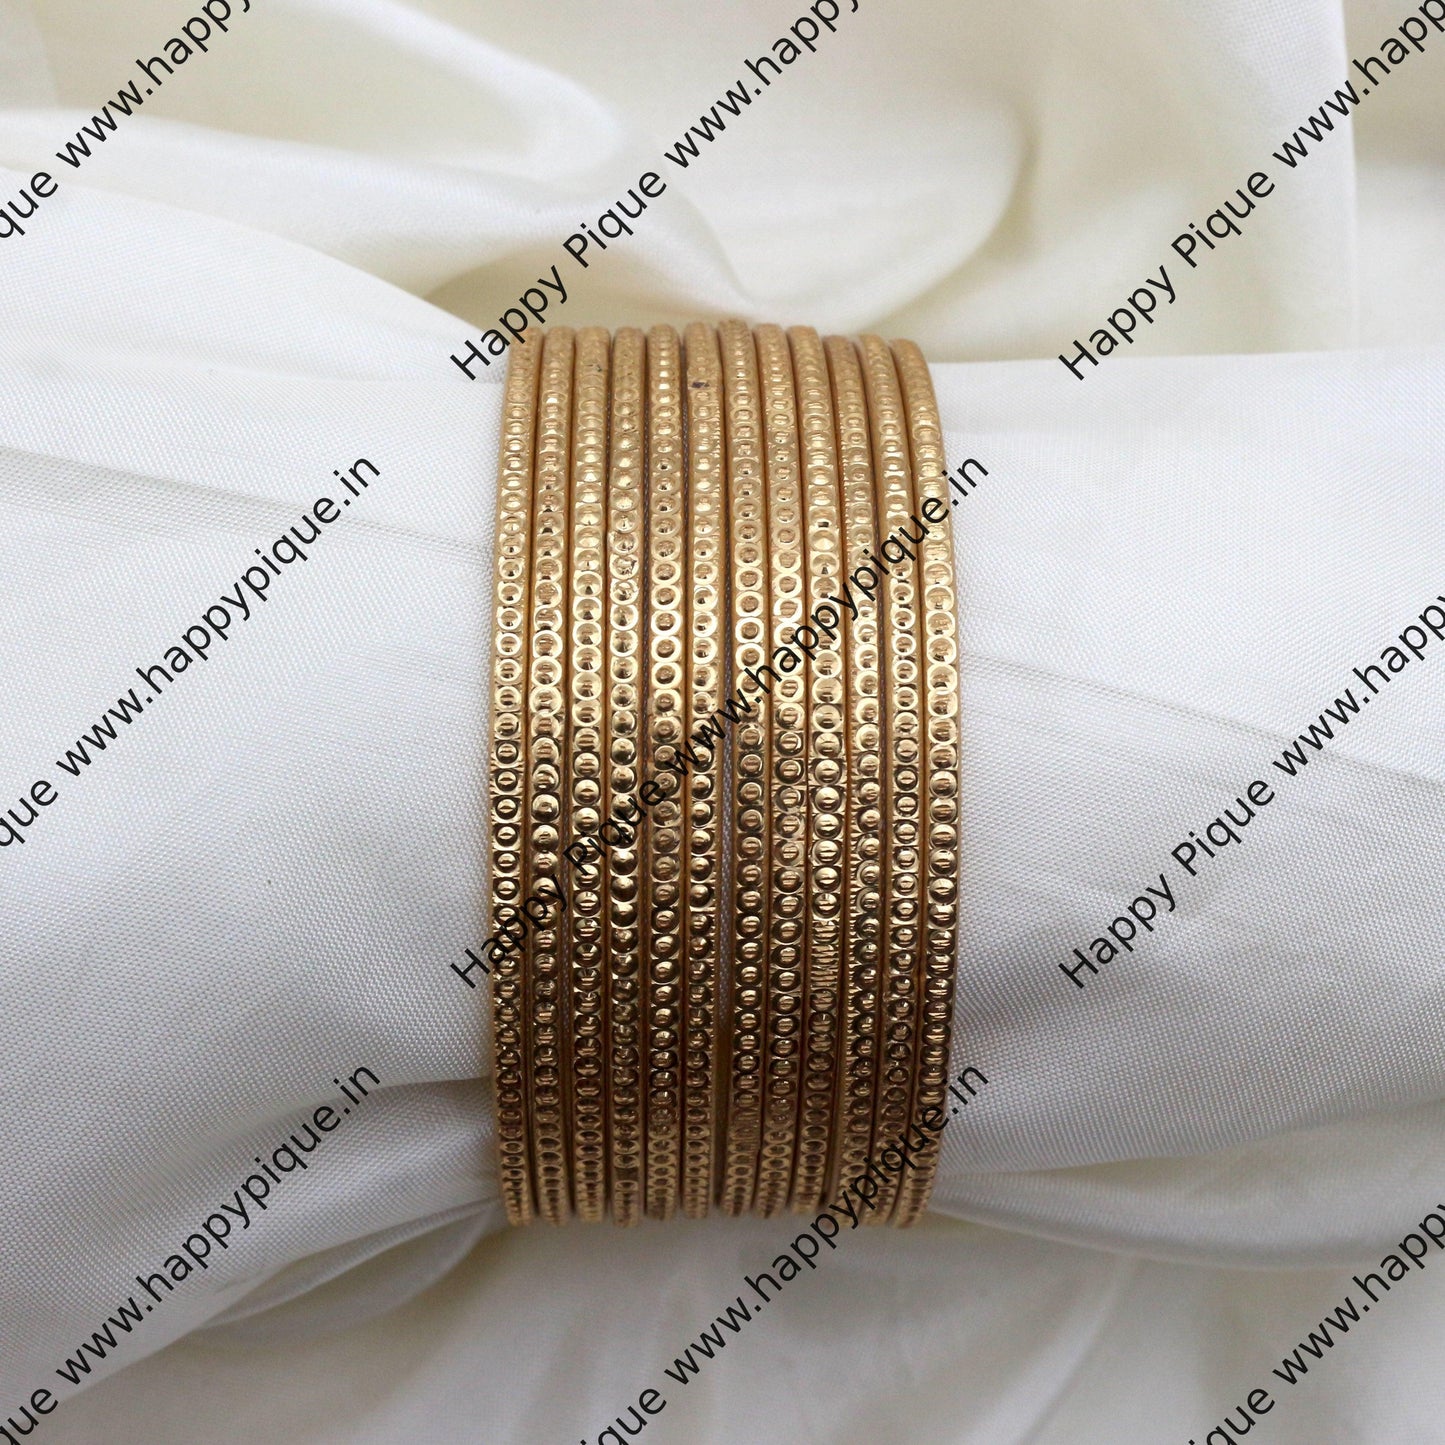 Real Gold Tone Set of 12 Bangles - SS016 - Daily Wear/Office Wear/Function Wear Bangles